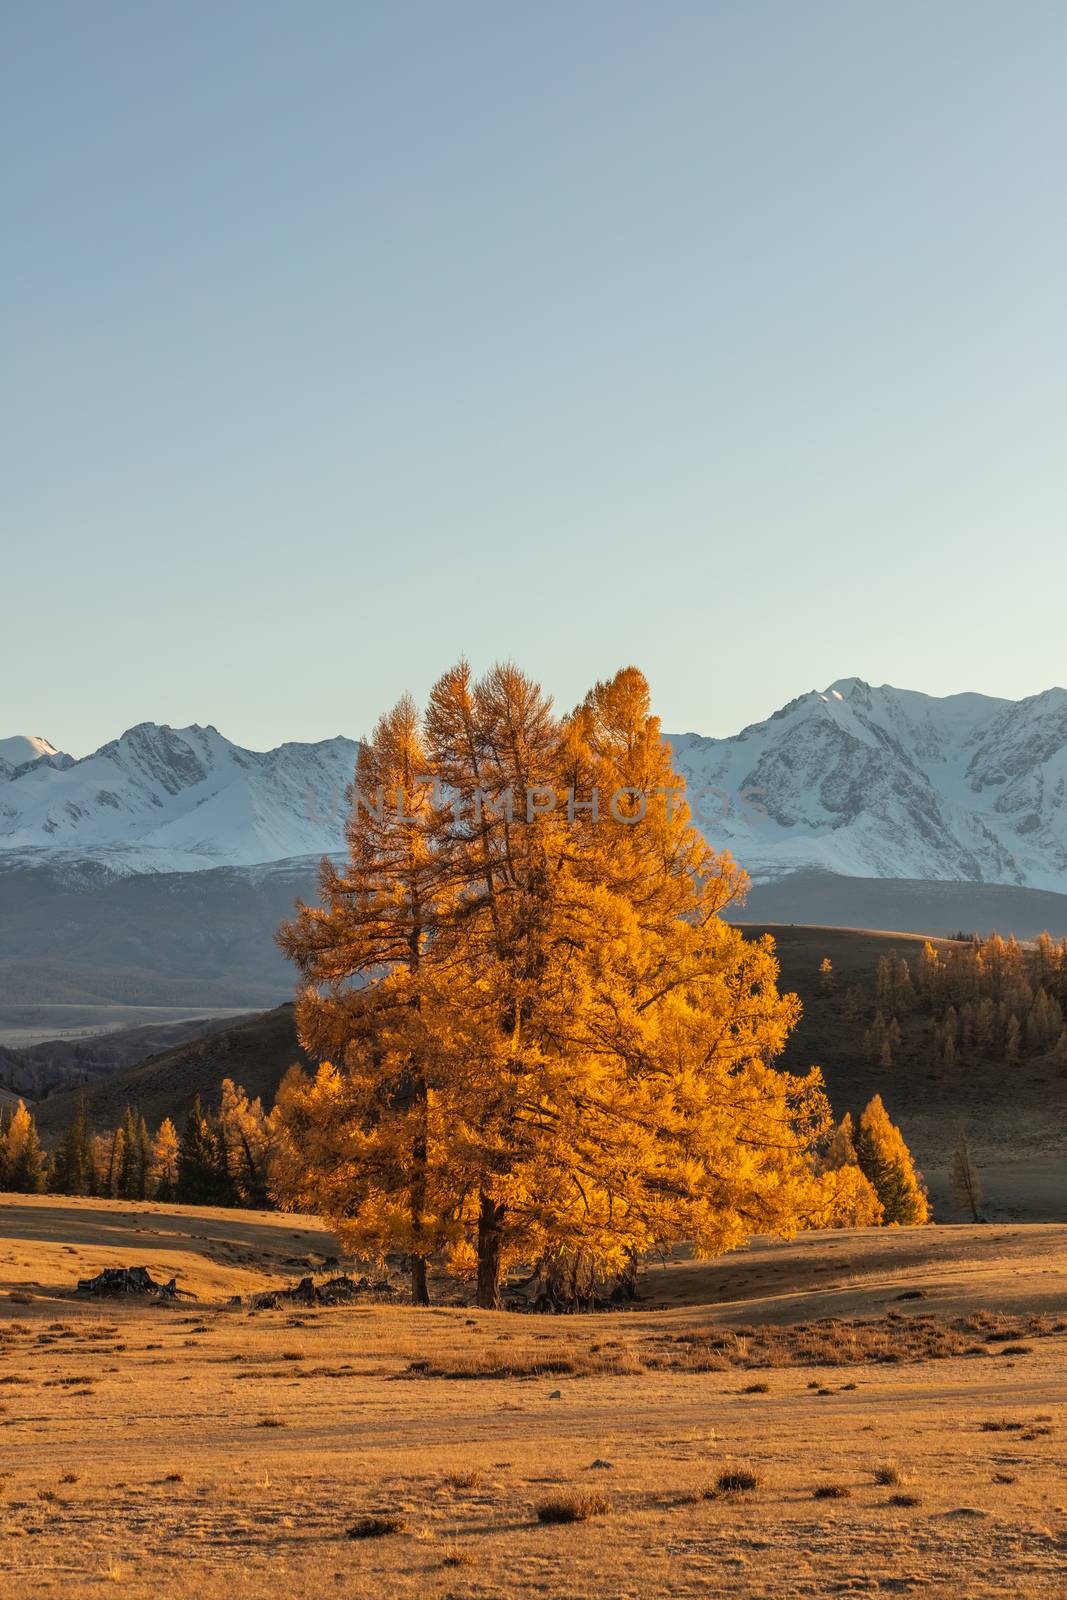 Beautiful portrait size shot of a golden tree in the foreground and white snowy mountains in the background. Fall time. Sunset. Altai mountains, Russia. Golden hour.